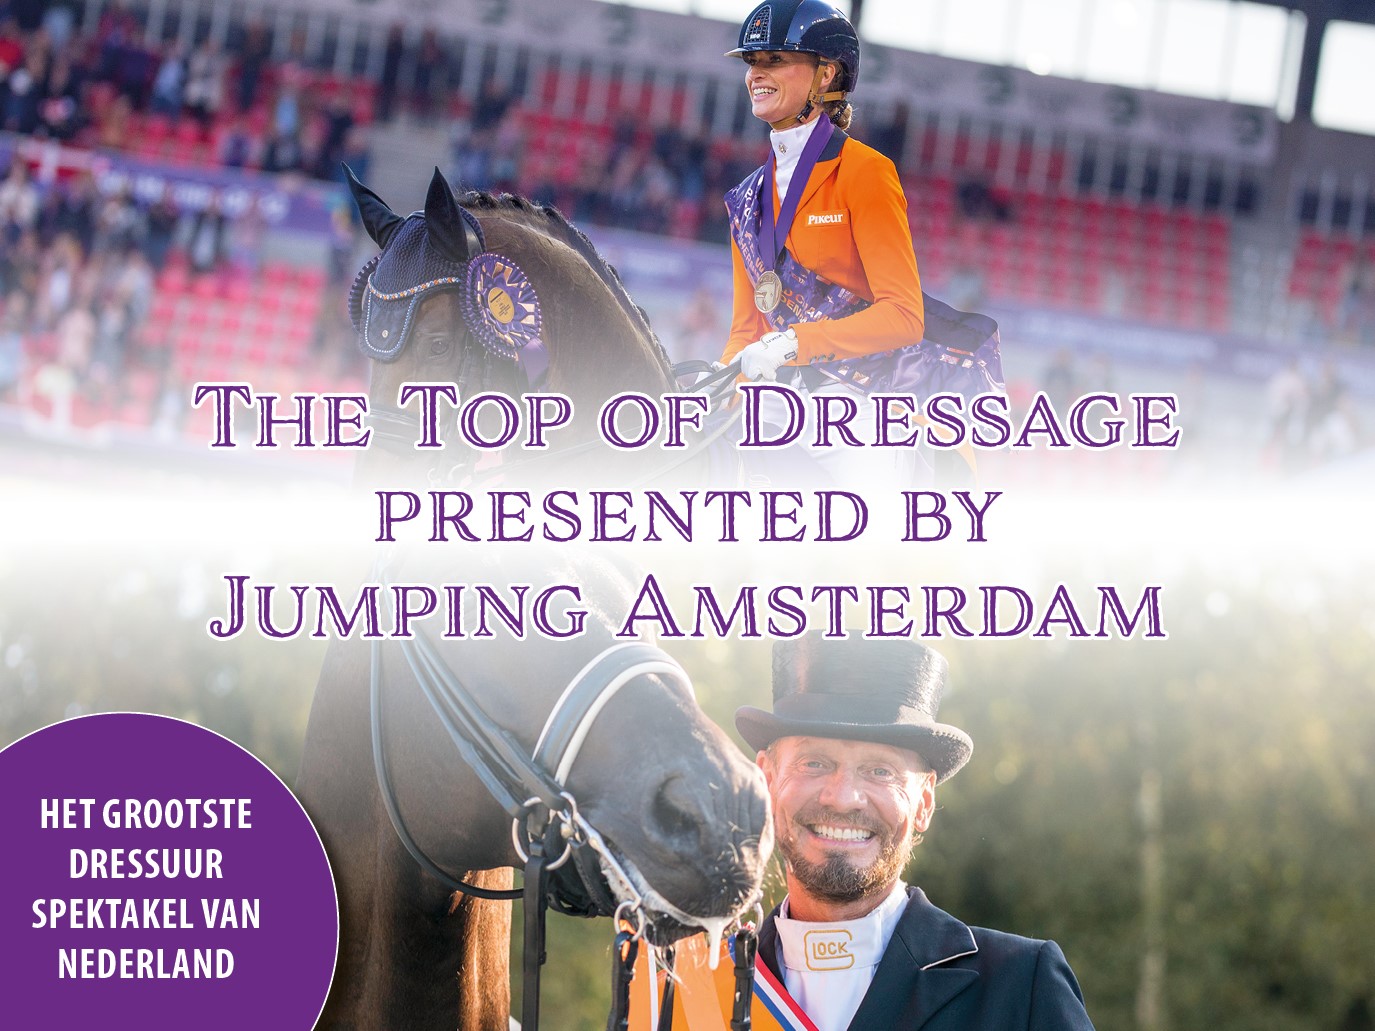 The TOP of Dressage presented by Jumping Amsterdam